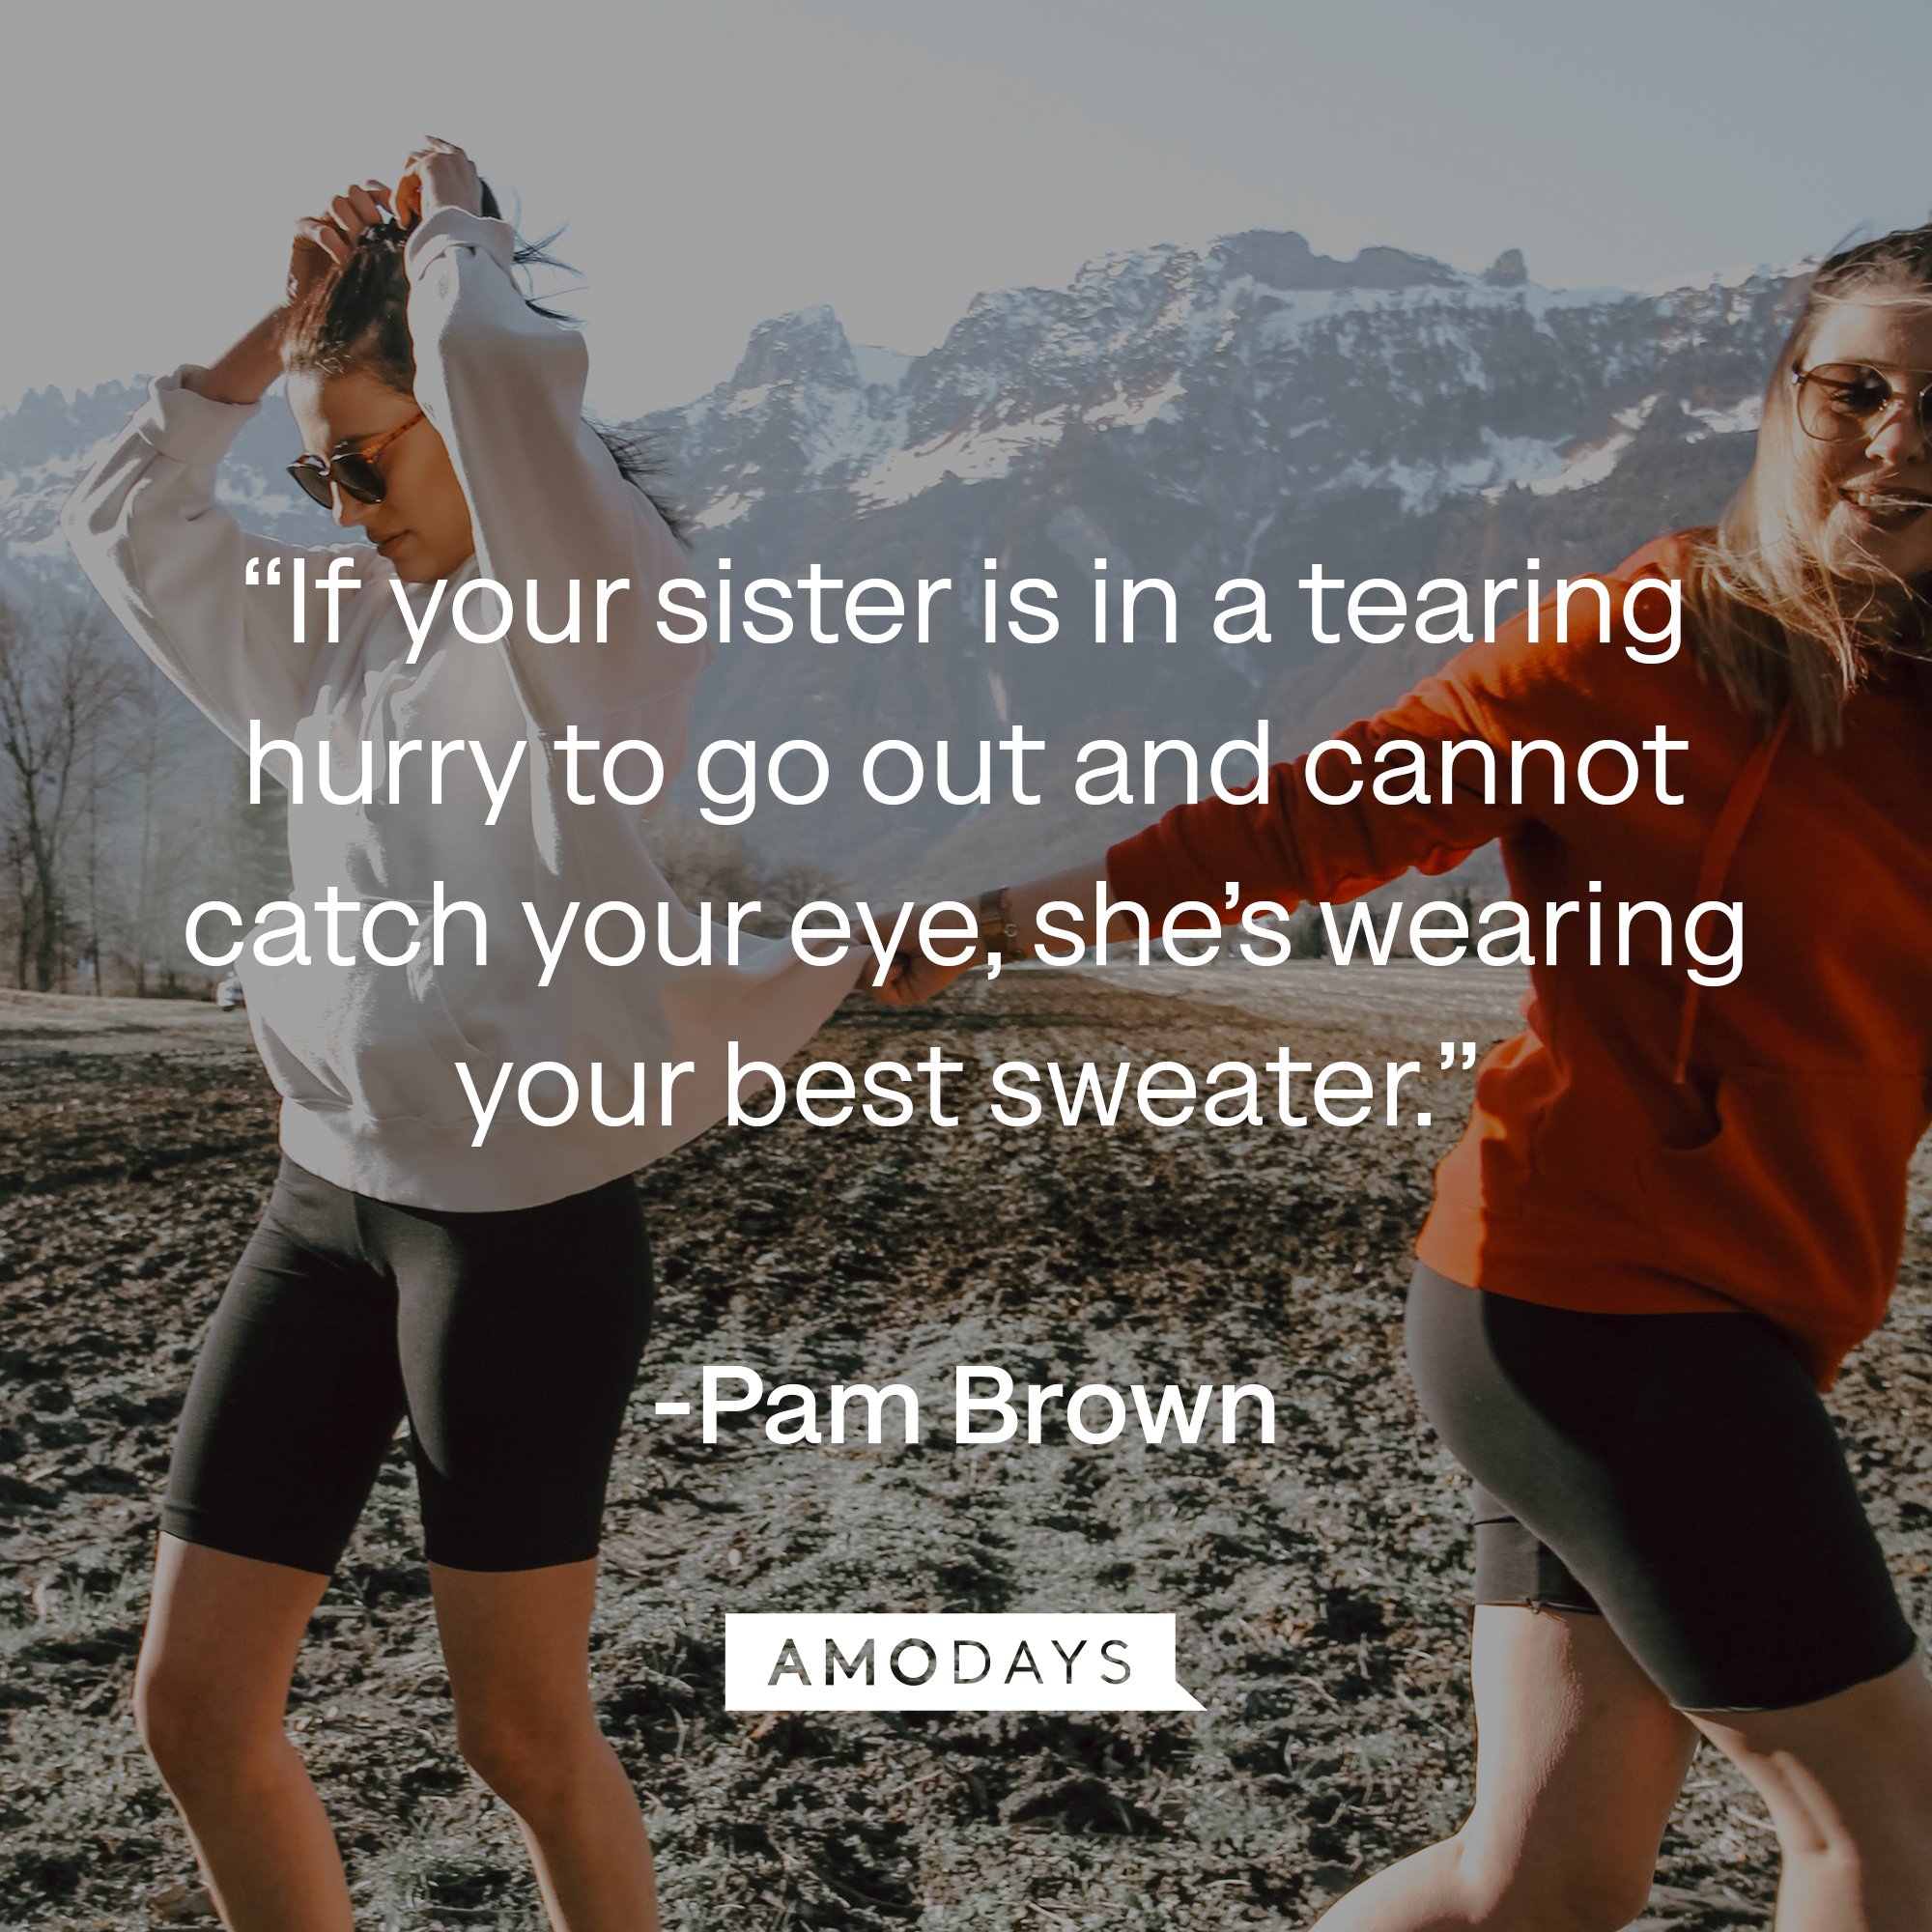  Pam Brown's quote: “If your sister is in a tearing hurry to go out and cannot catch your eye, she’s wearing your best sweater.” | Image: AmoDays